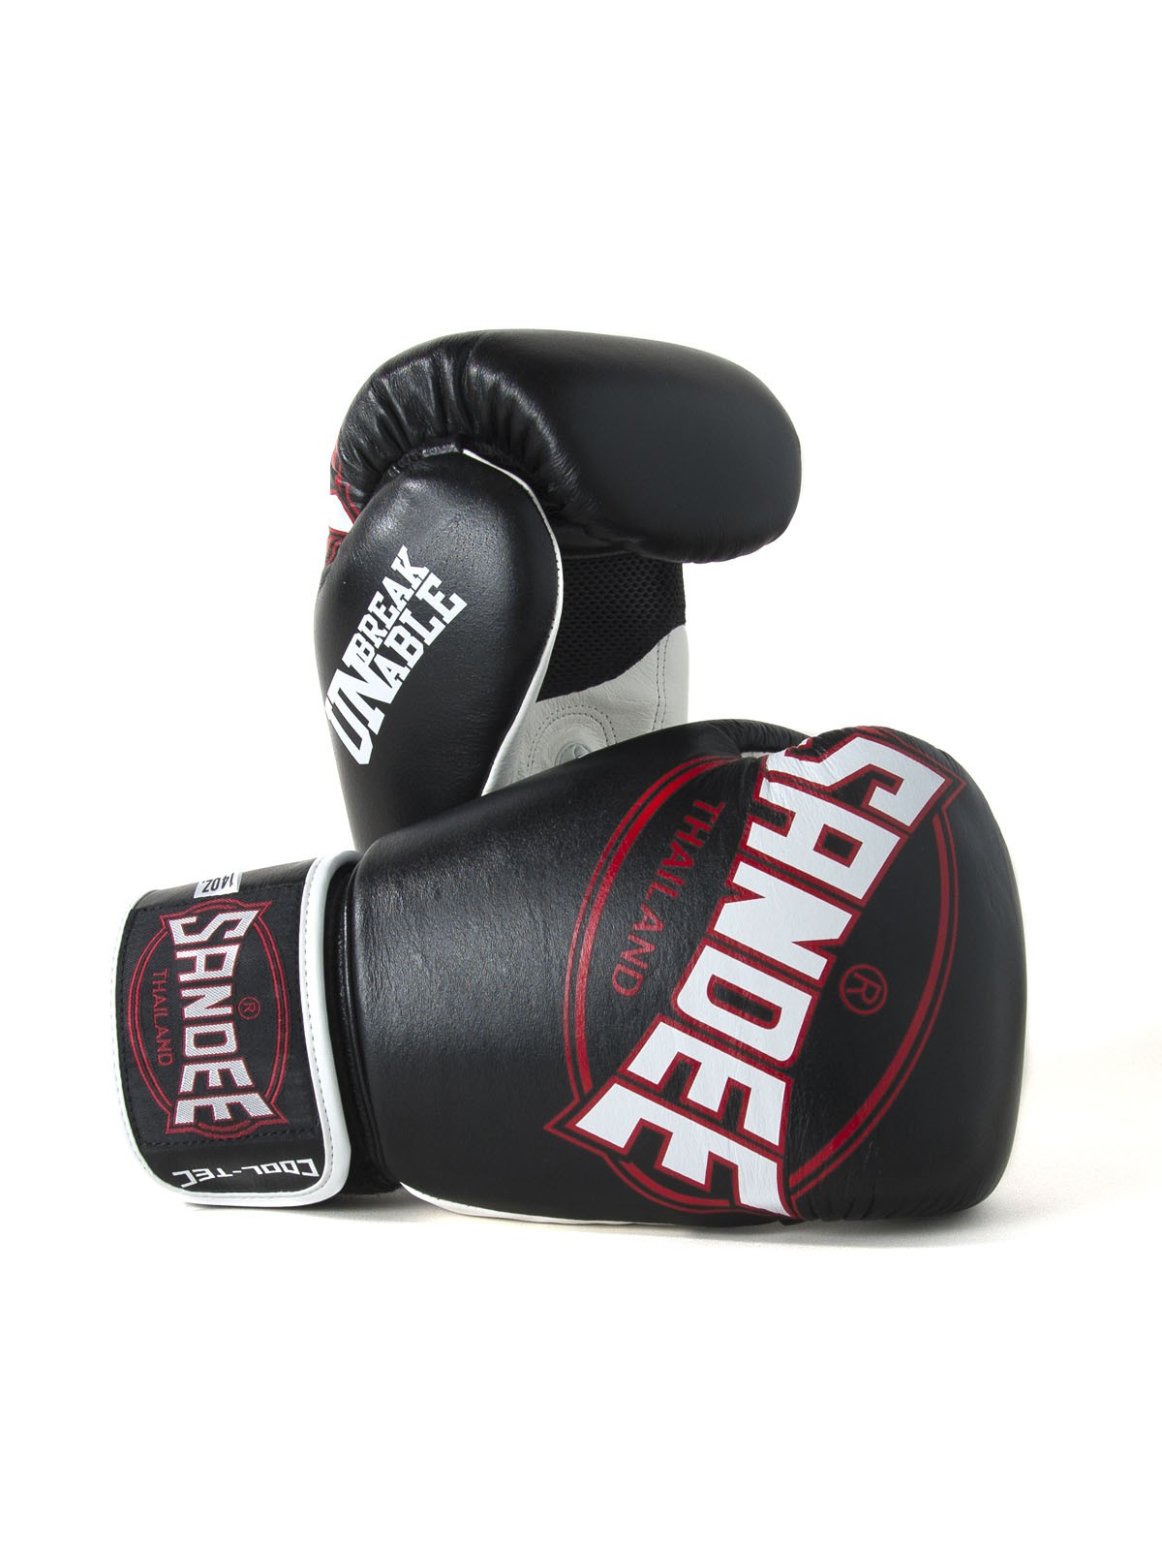 Sandee Black Leather Cool Tech Muay Thai Boxing Gloves - Black - Click Image to Close